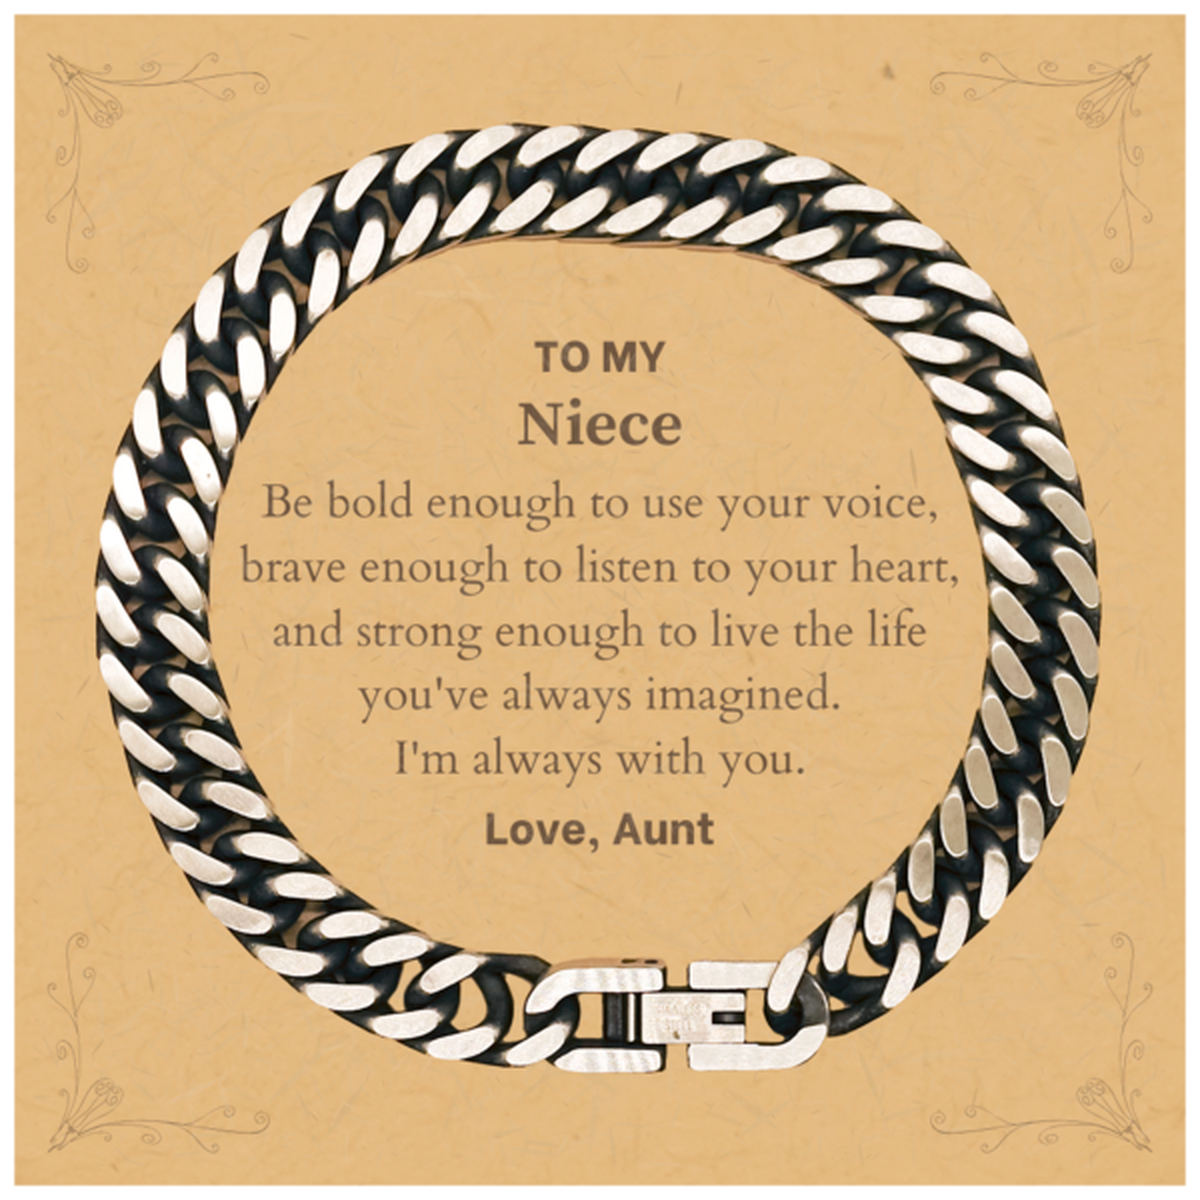 Keepsake Niece Cuban Link Chain Bracelet Gift Idea Graduation Christmas Birthday Niece from Aunt, Niece Be bold enough to use your voice, brave enough to listen to your heart. Love, Aunt